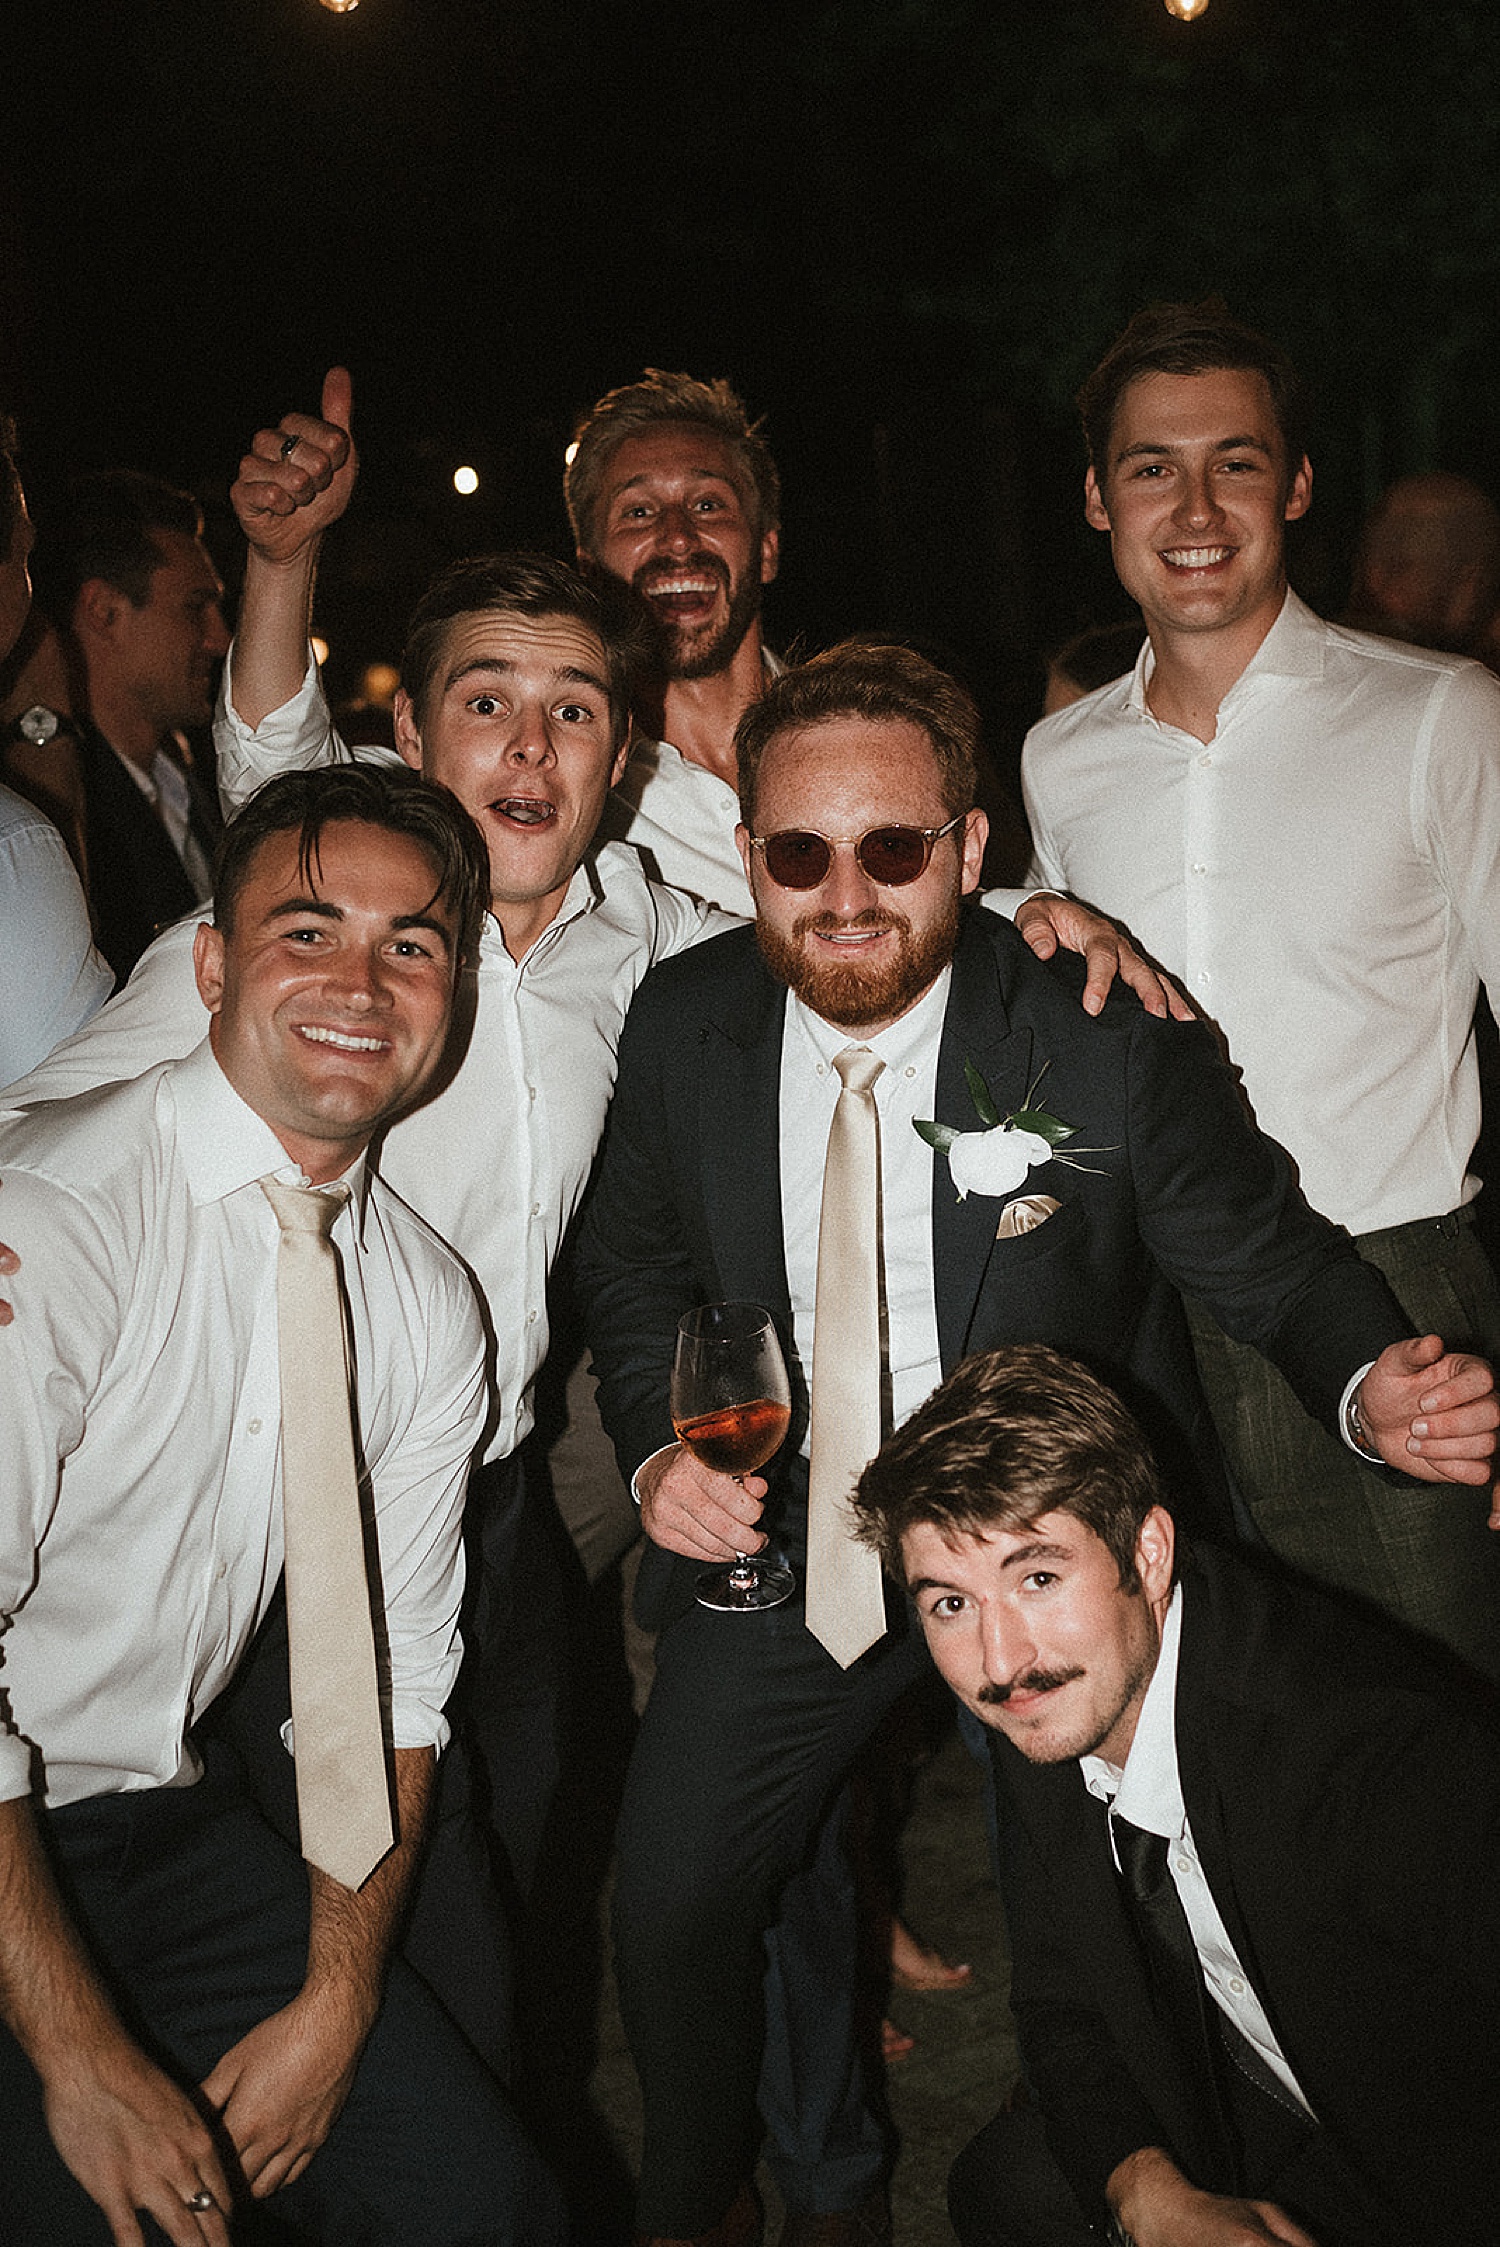 Groomsmen Dancing at wedding reception wearing sunglasses and holding drinks 